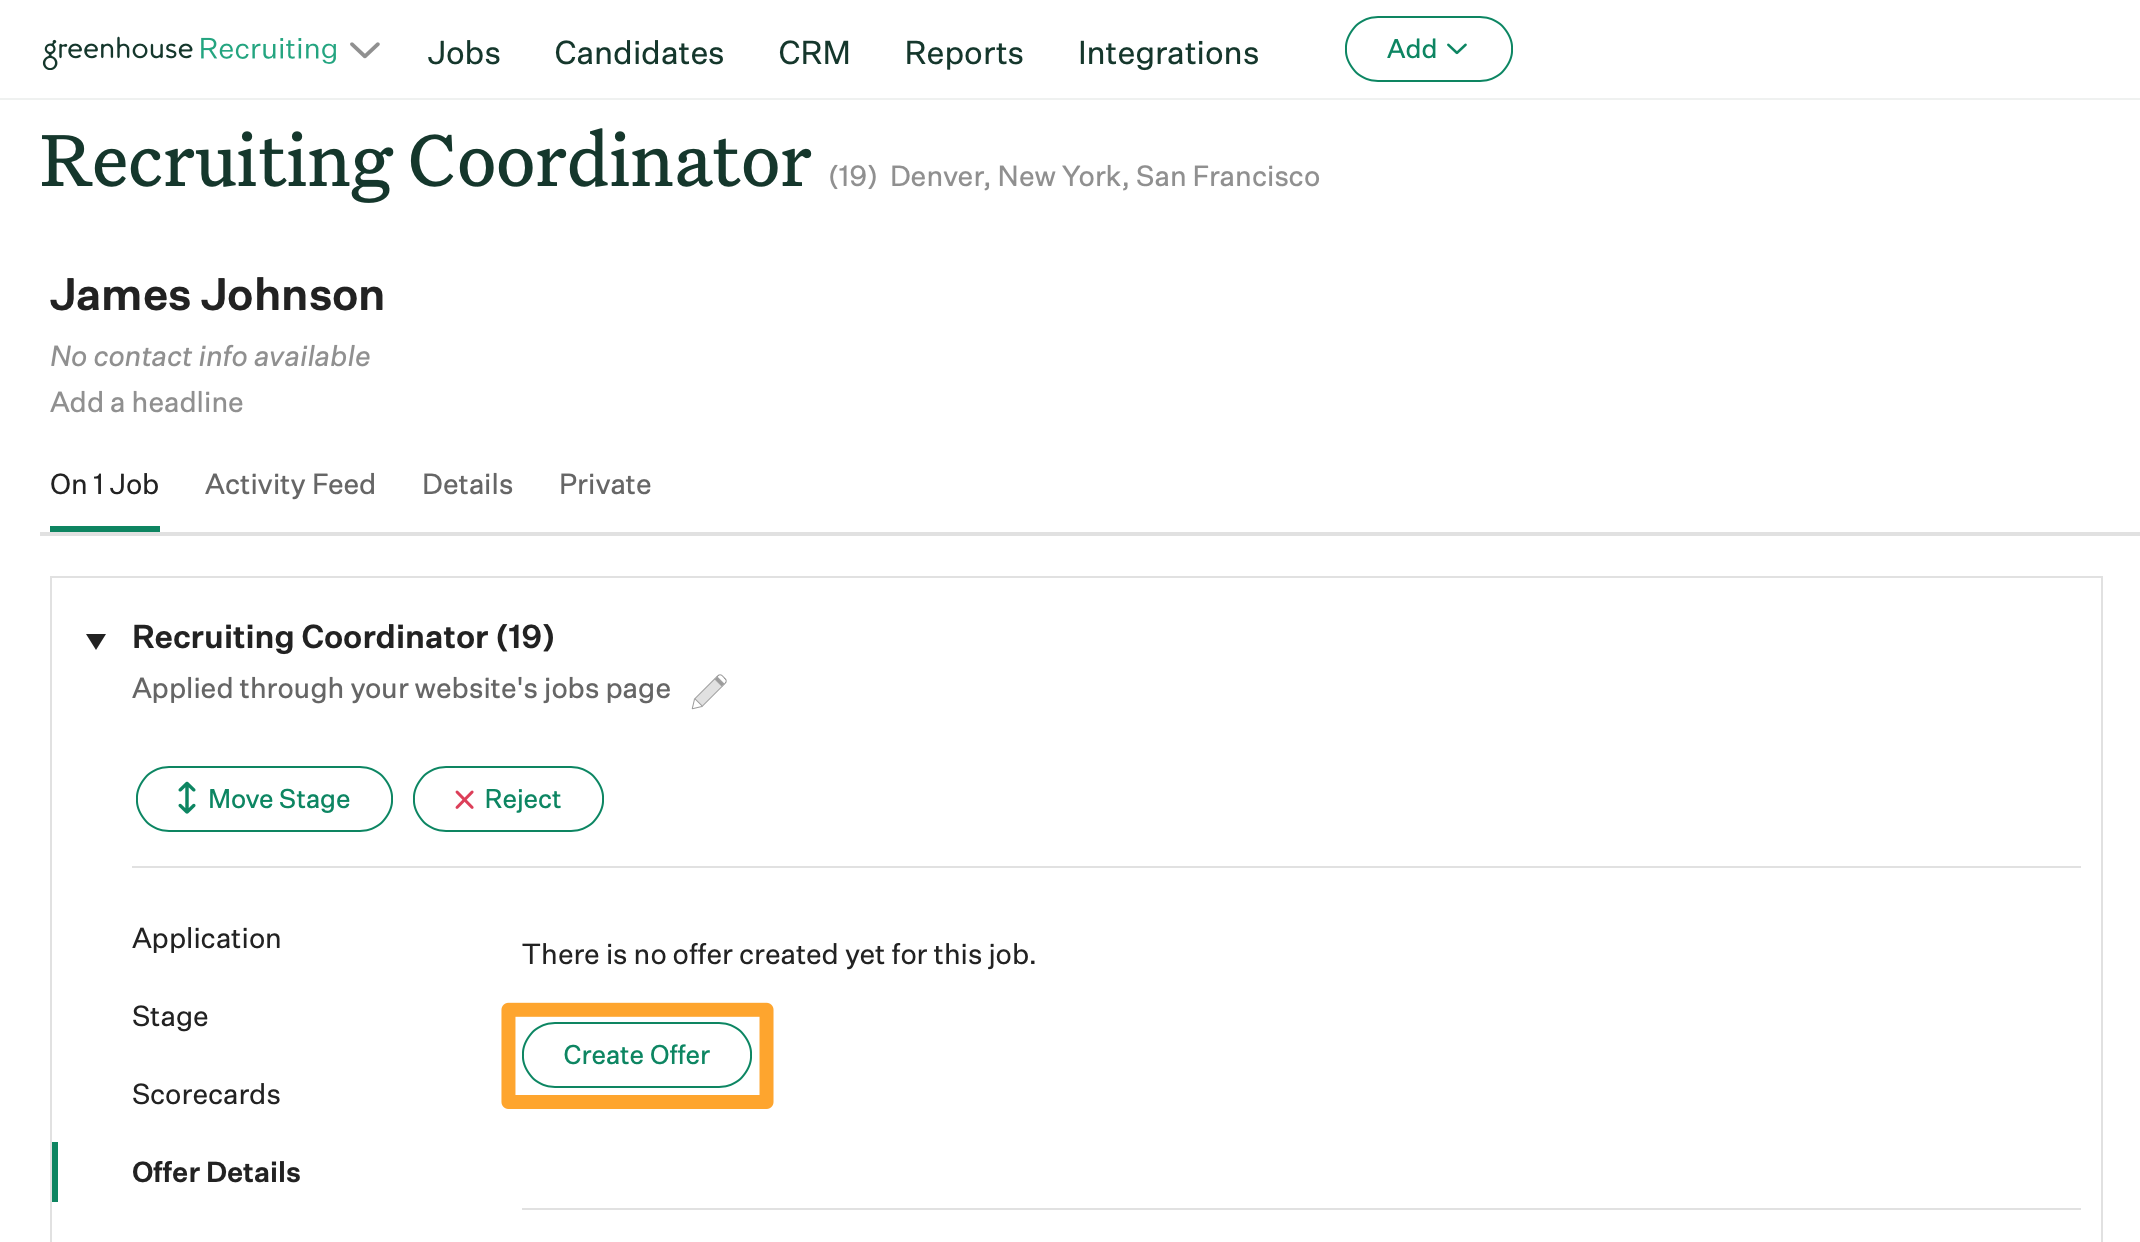 An example candidate named James Johnson is shown on a job called Recruiting Coordinator, with the Create Offer button highlighted in marigold